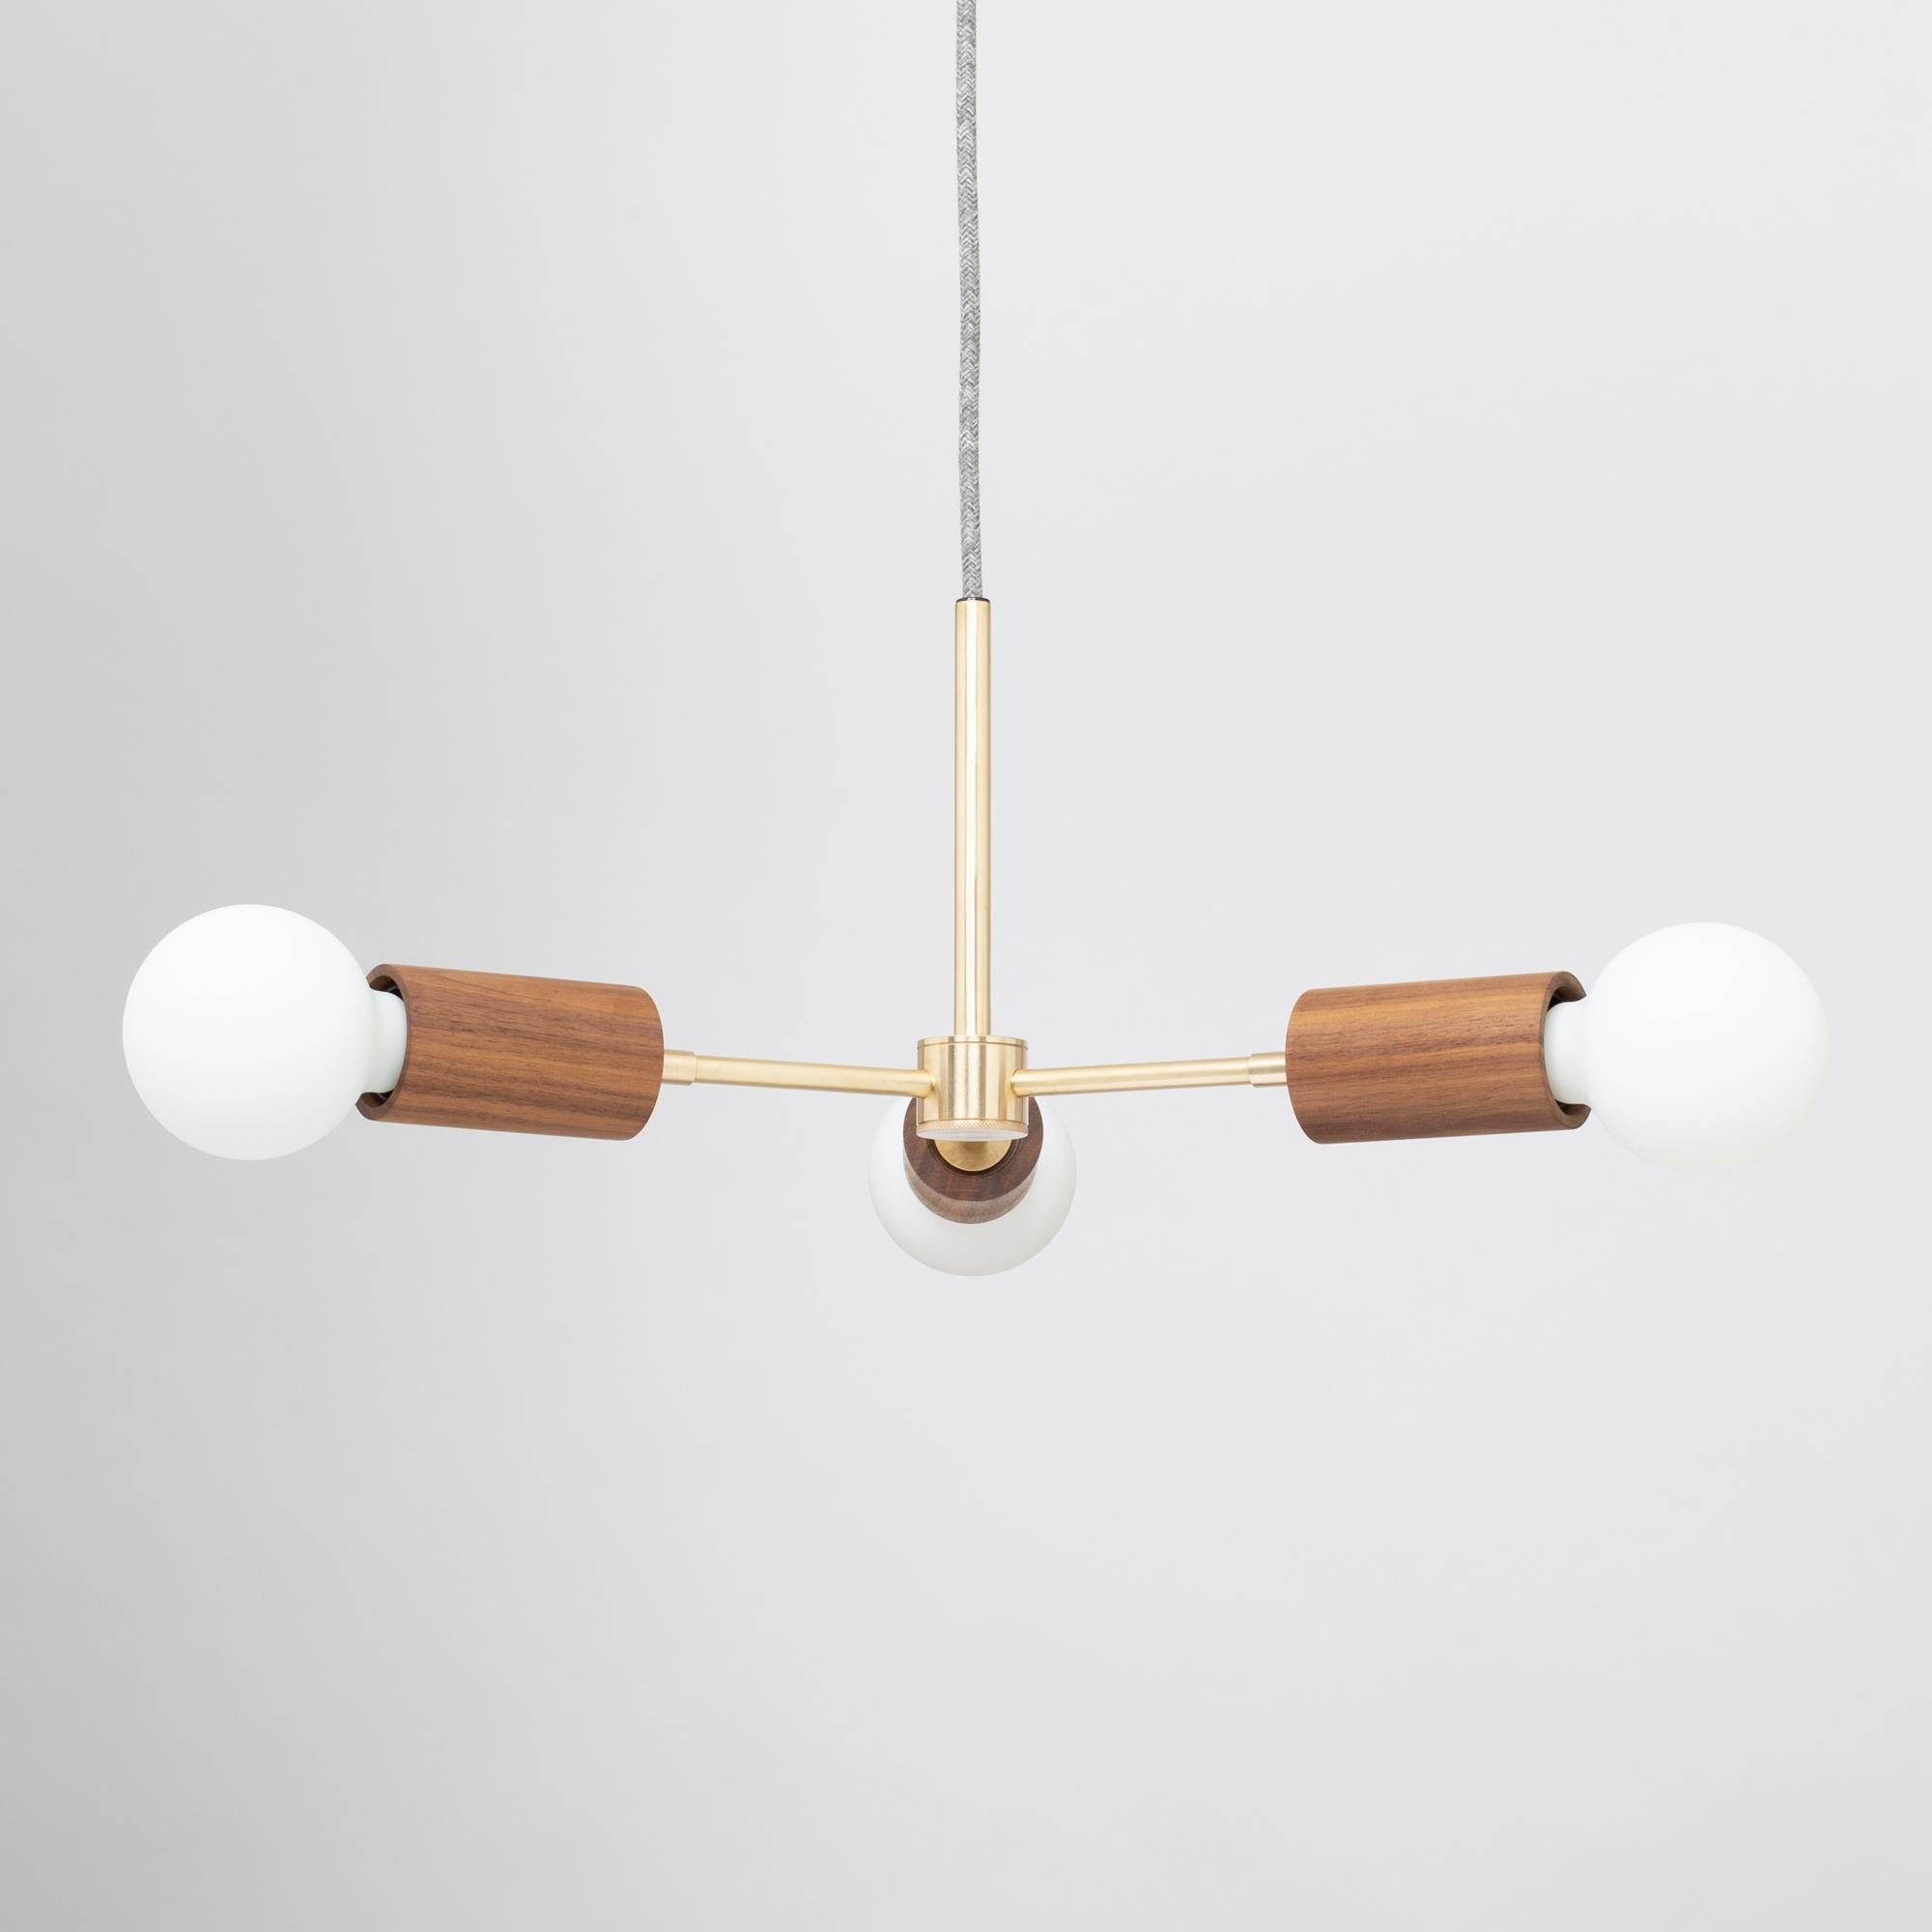 Triple Arm Walnut Pendant
Oak or Walnut options available 
2000K - 2800K 95CRI
1800 Dim to Warm Lumens
Sphere III bulbs included
Satin Brass lacquered finish
Fabric cable 
Custom drop from ceiling supplied
Handcrafted in UK. 
